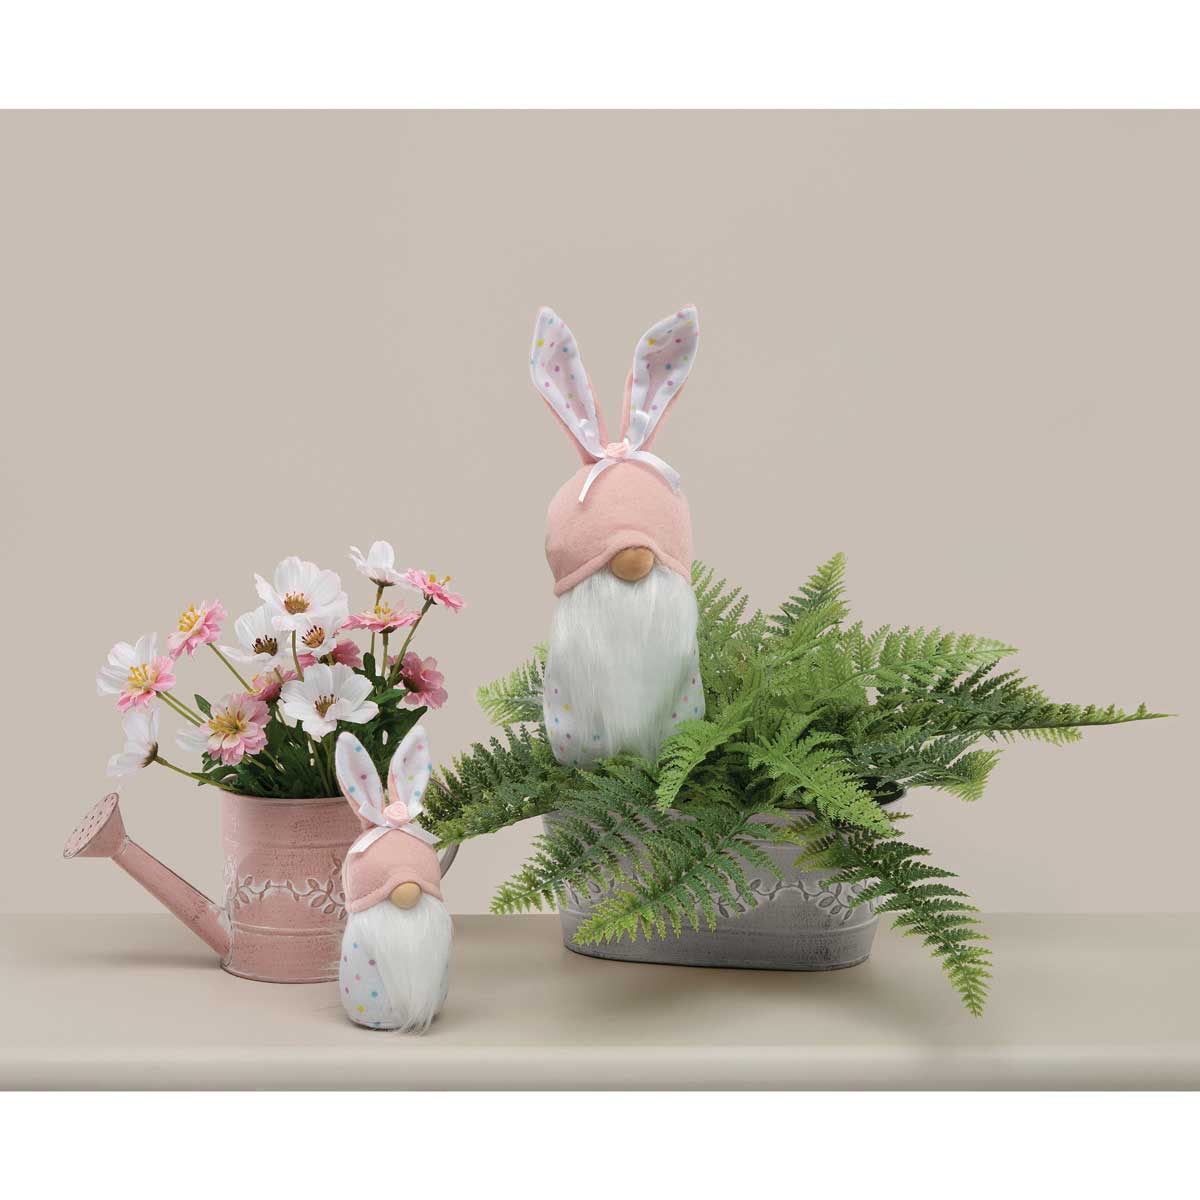 b70 GNOME PINDOT BUNNY LARGE 3.75IN X 6IN X 11.5IN WHITE/PINK - Click Image to Close